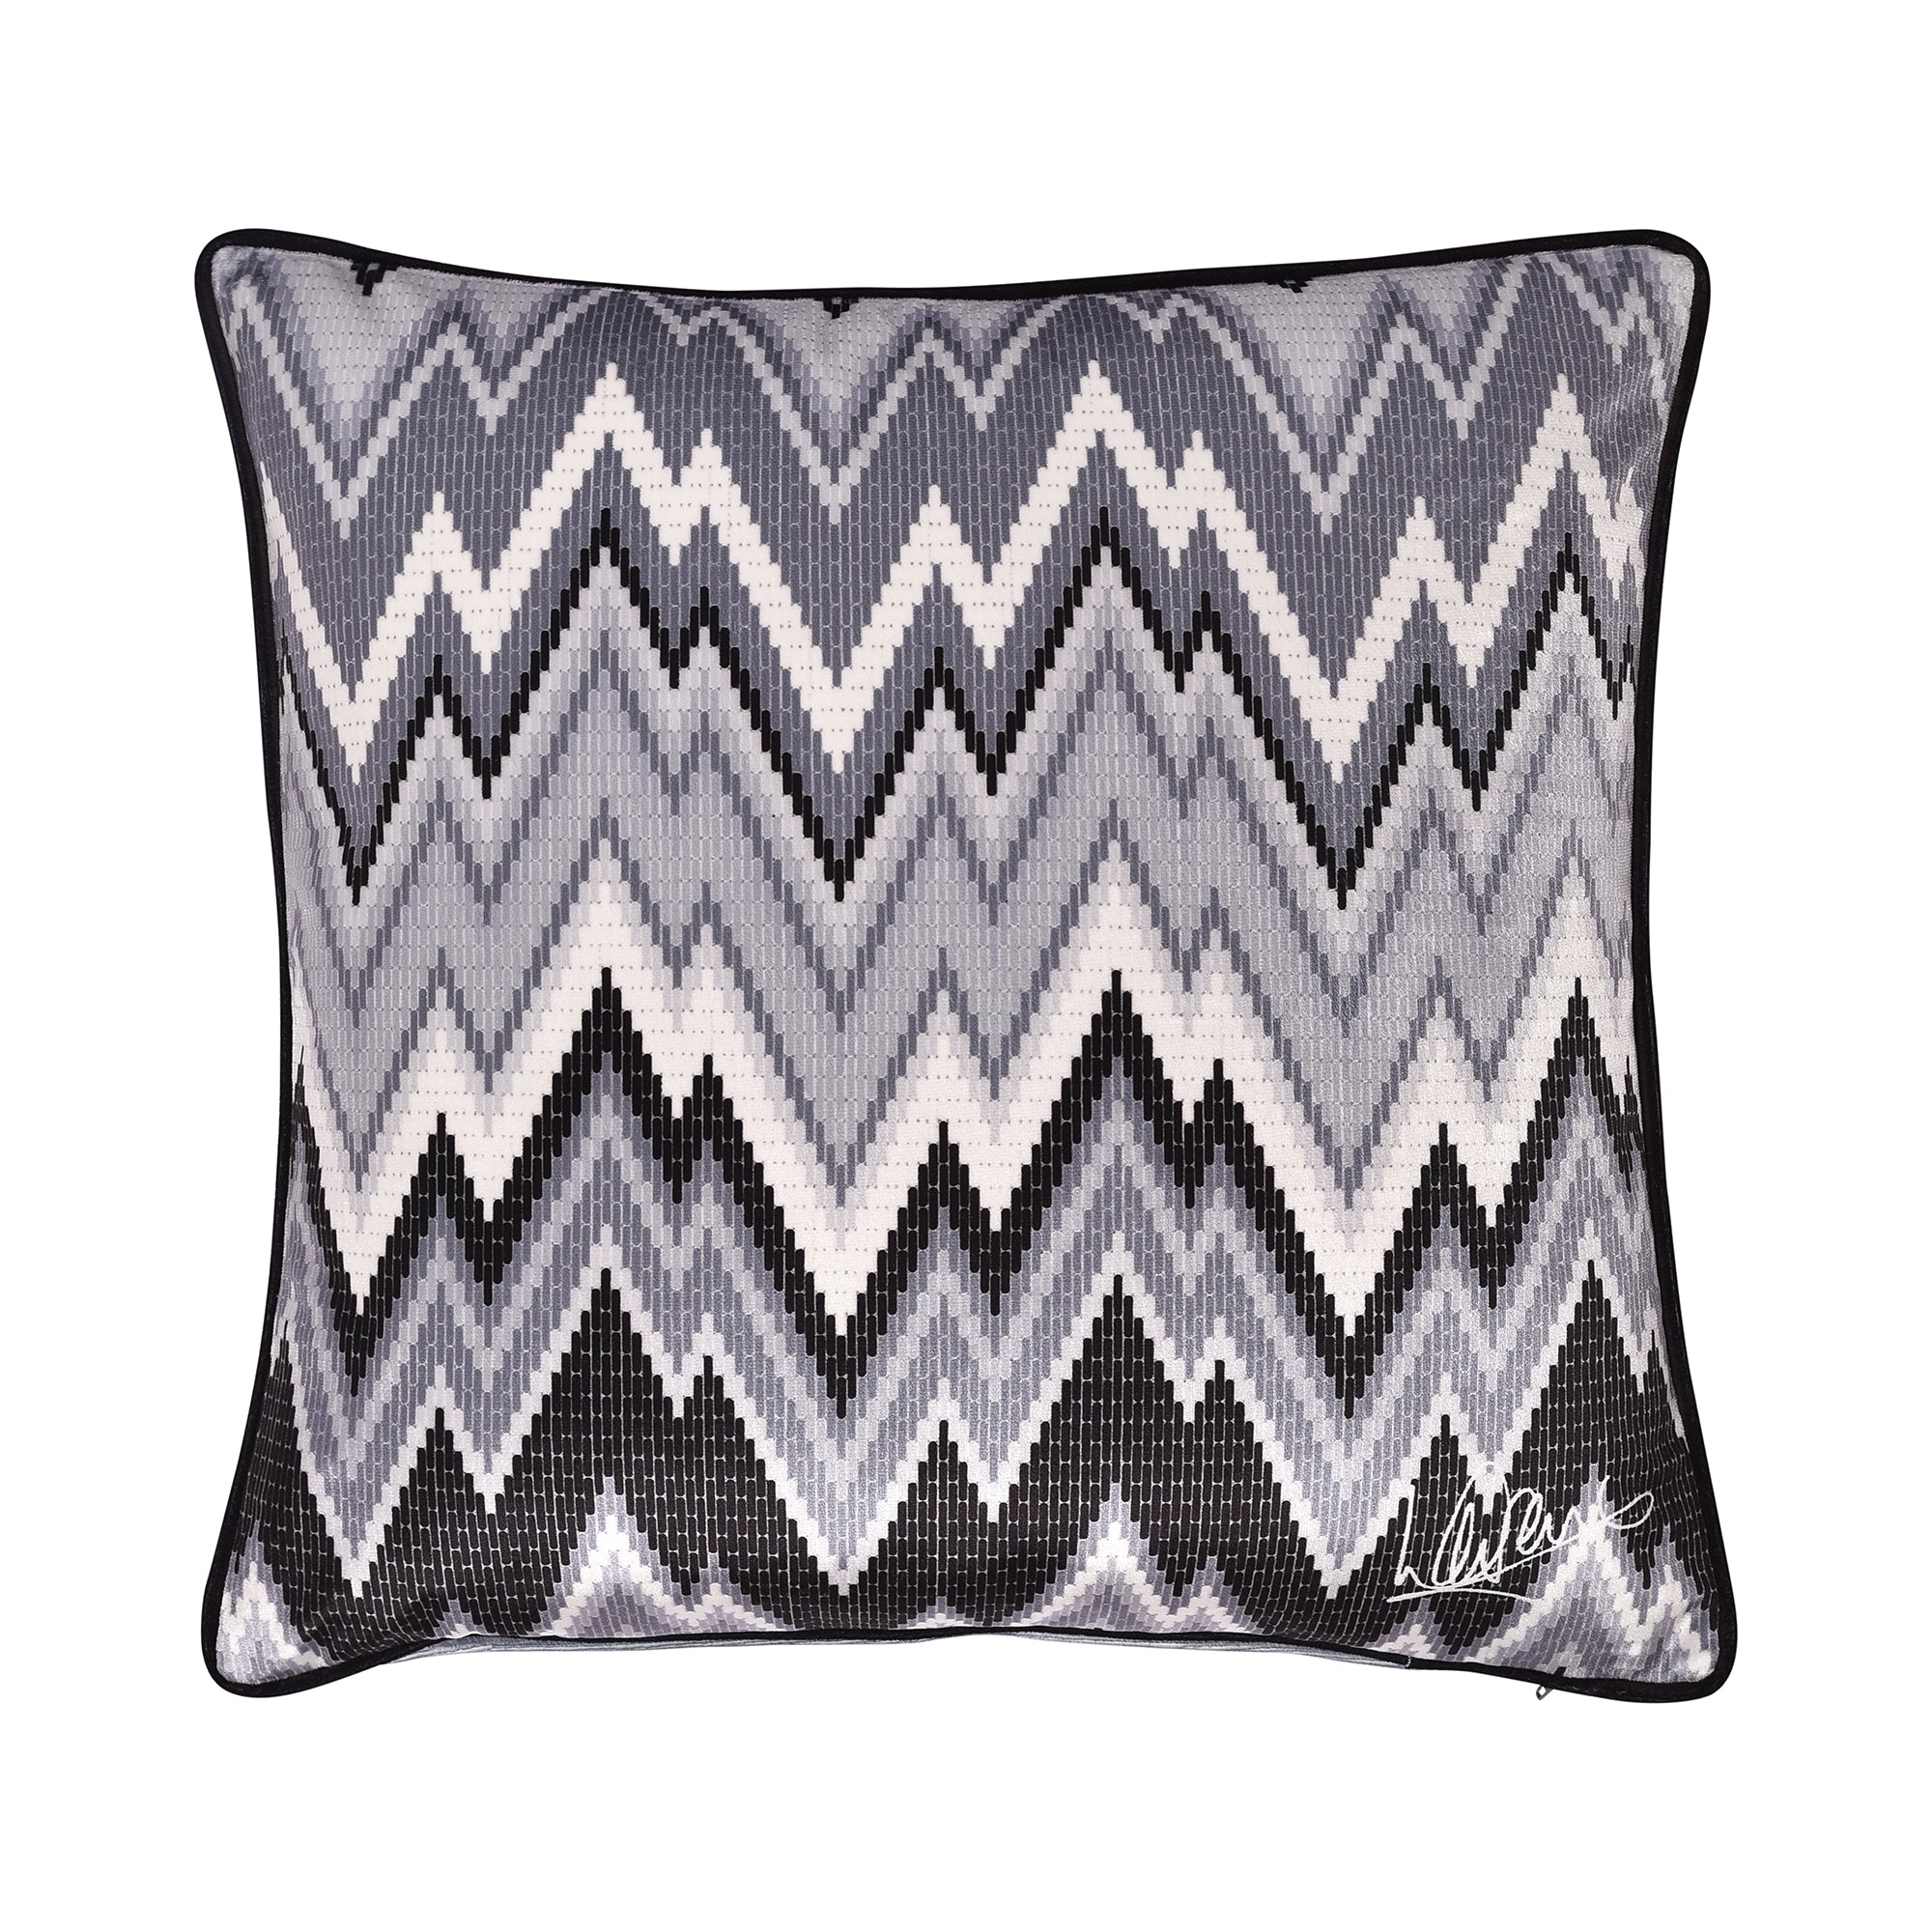 Cushion Cover Pants on Fire by Laurence Llewelyn-Bowen in Black/White